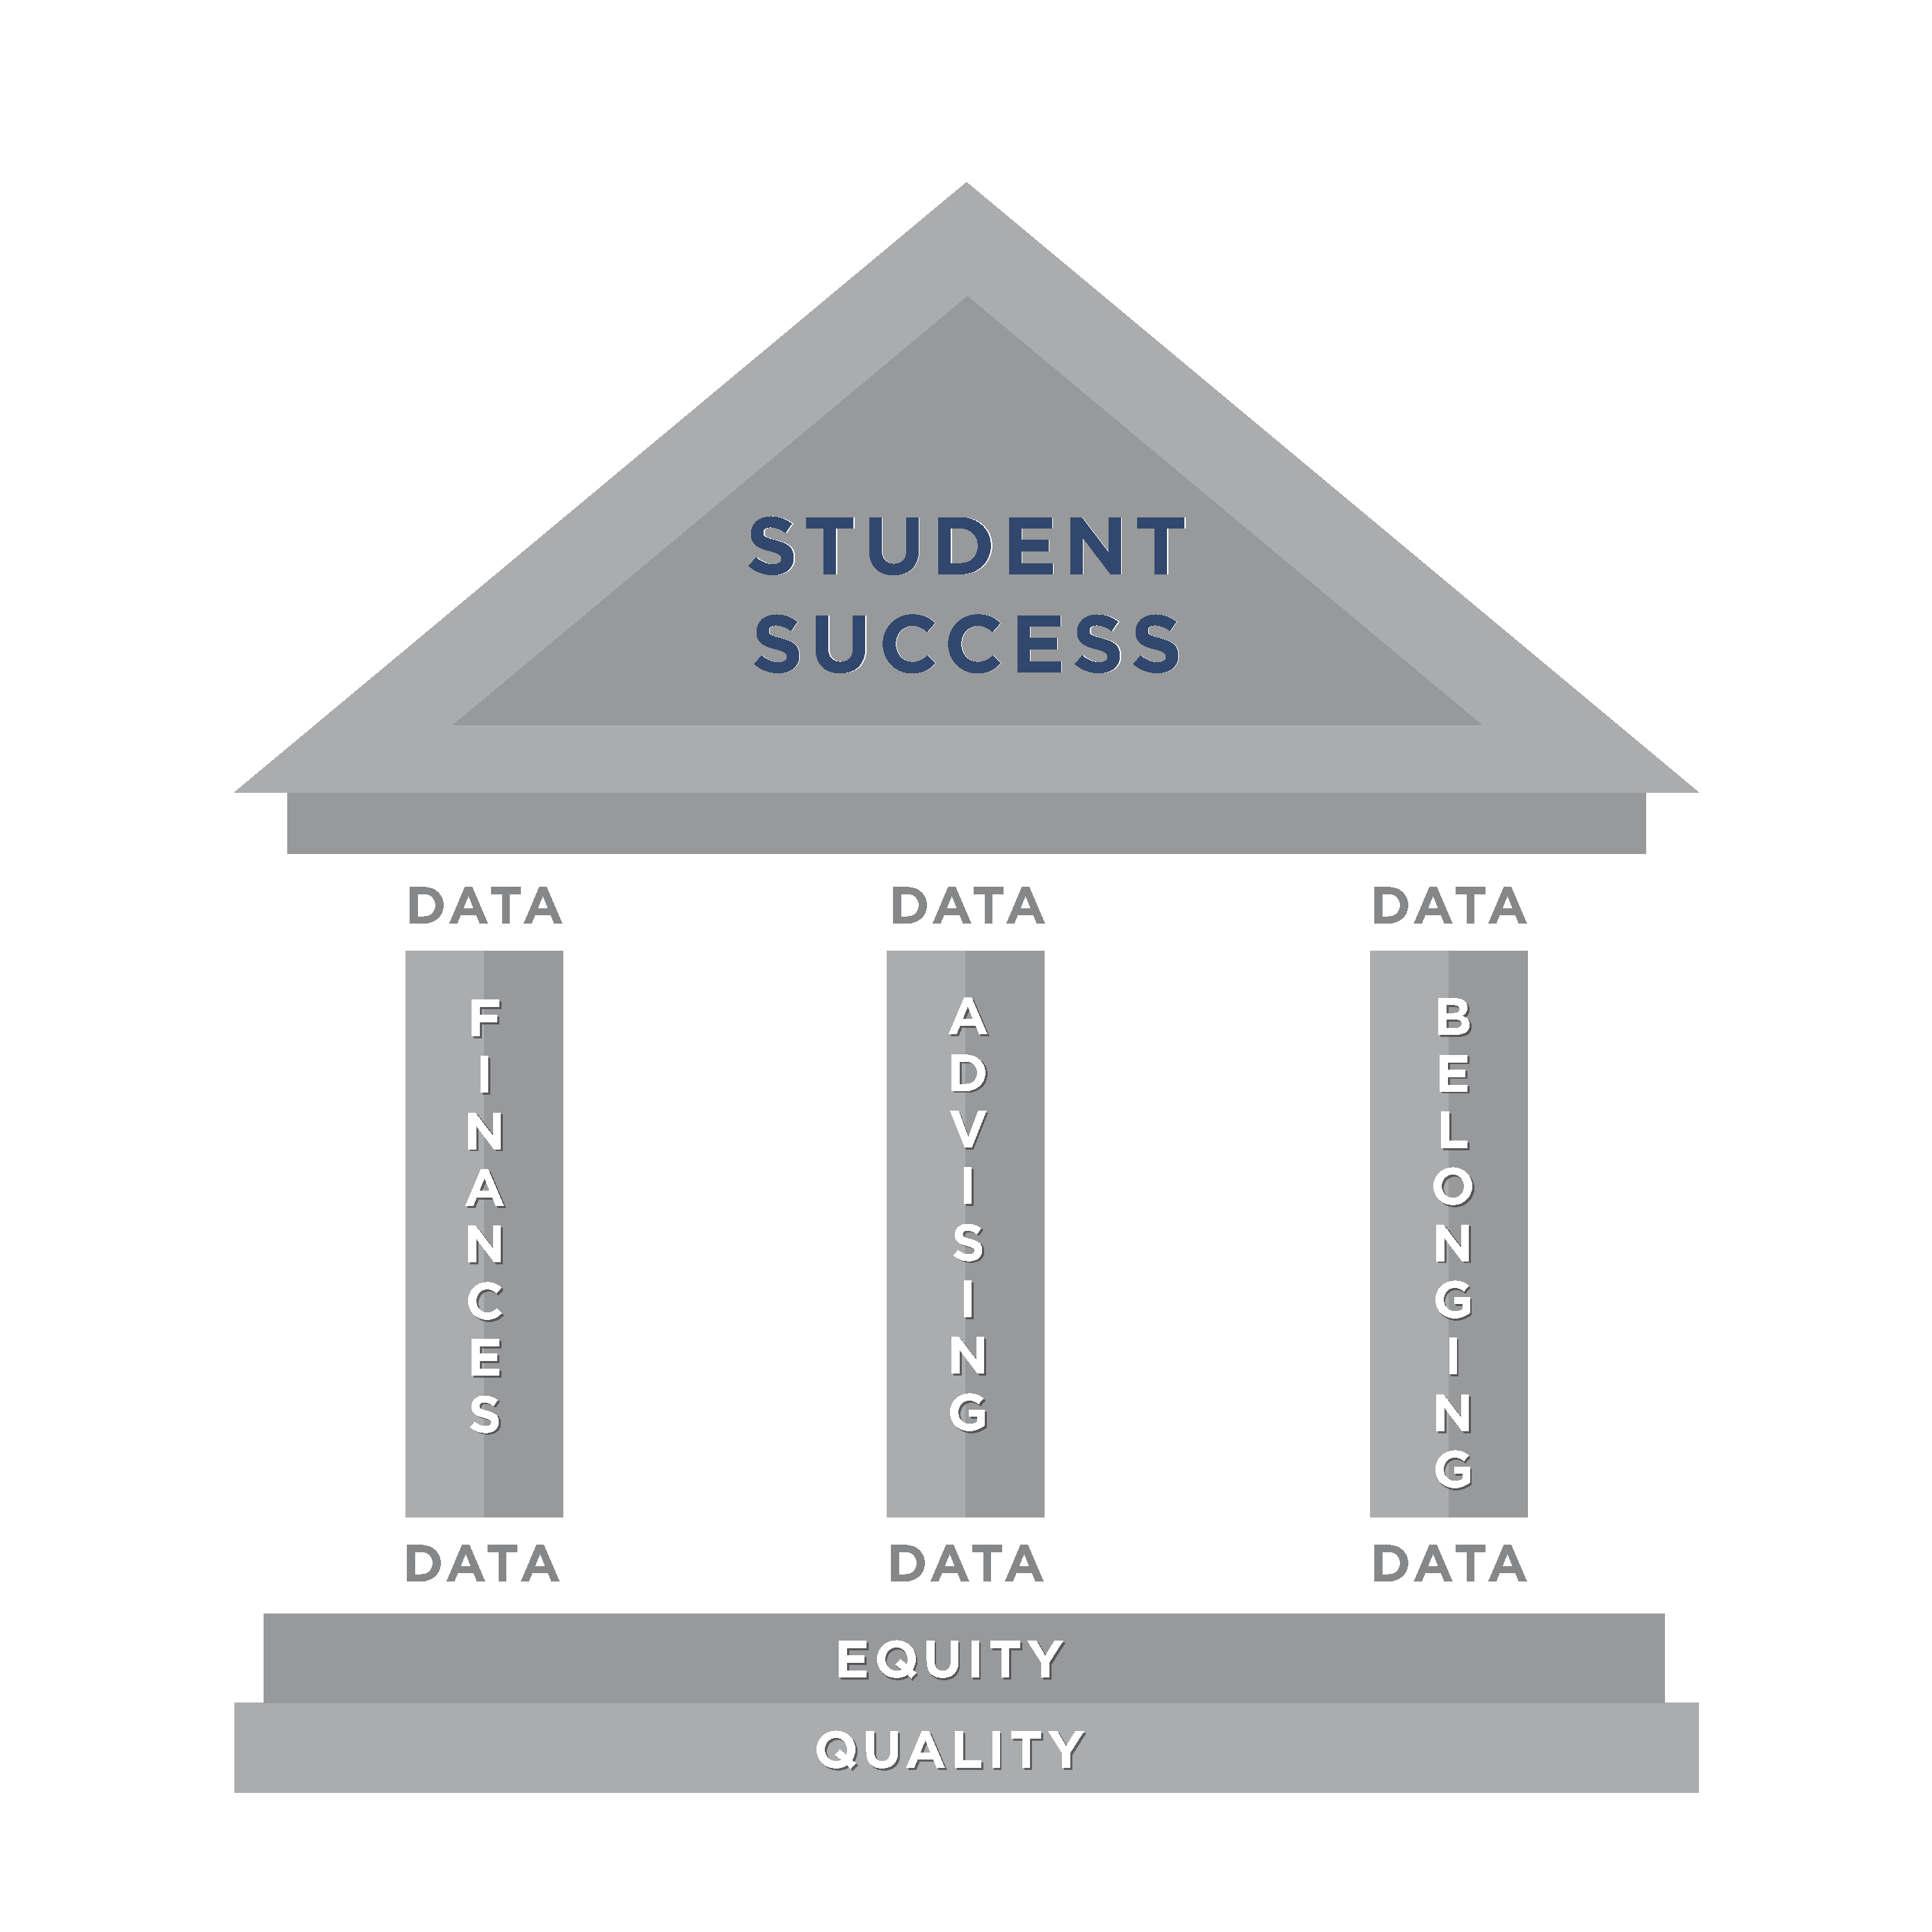 Illsutration of a greek pantheon building with pillars. Text of illustration: Student Success (on the top), three pillars with the text: Finance Data, Advising Data, Belonging Data, and then text on the bottom of the building: Equity and Quality.